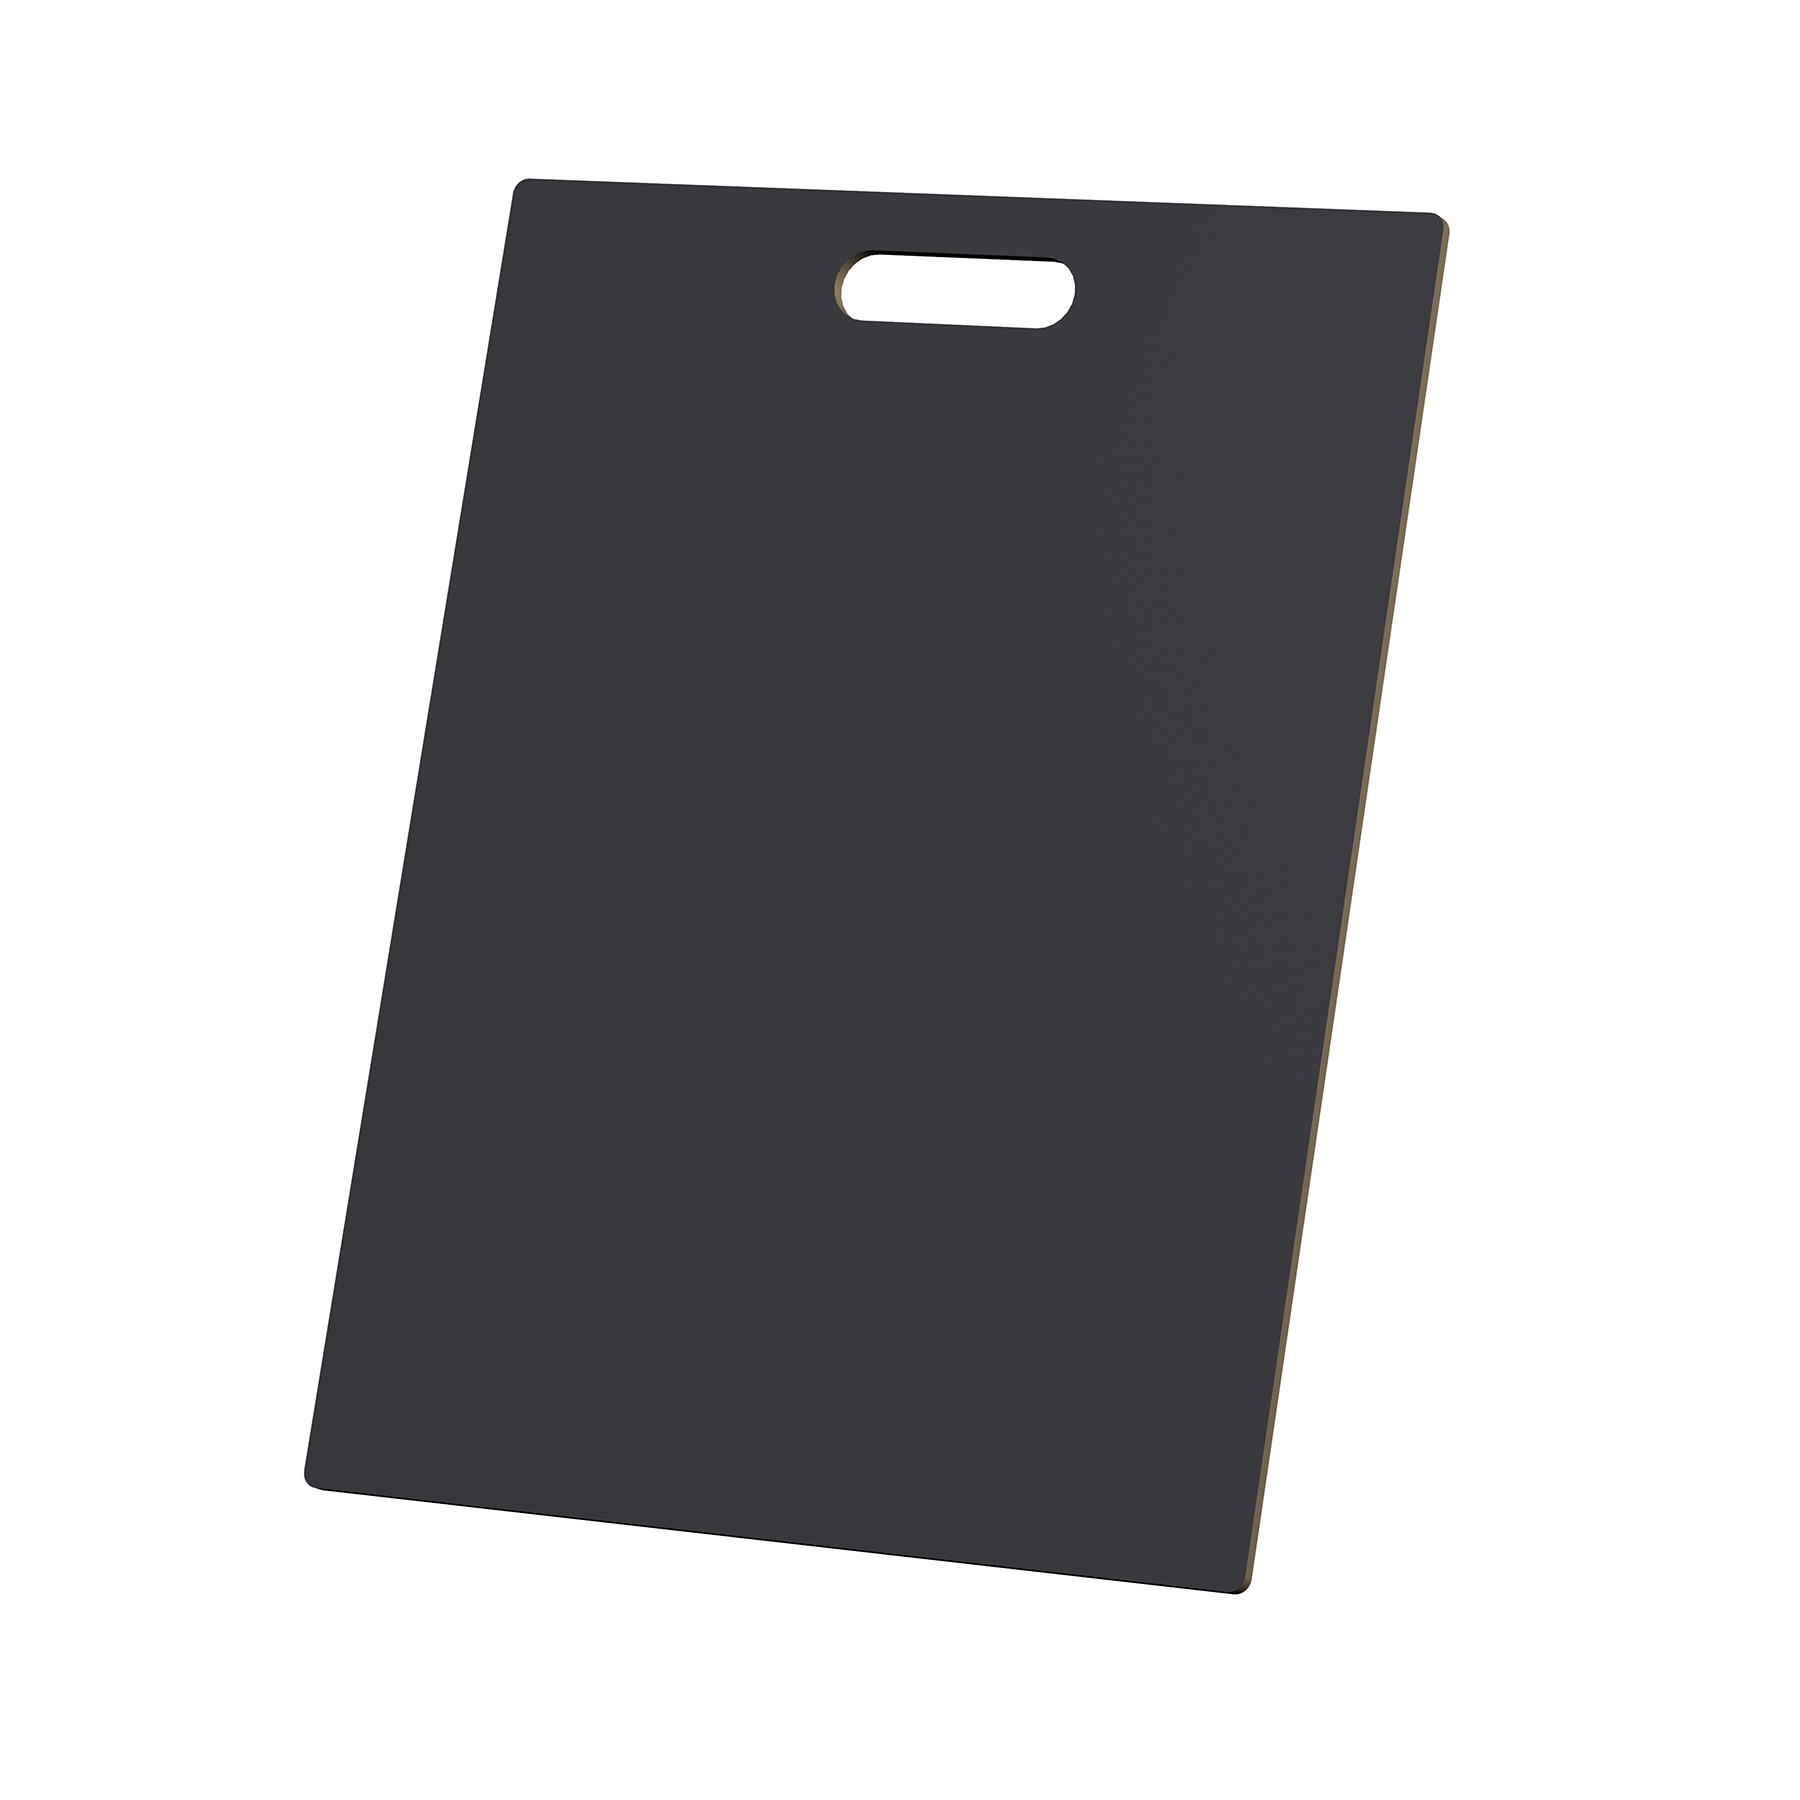 15 inch x 21 inch Black Sample Display Board for Tile Flooring Stone Wood